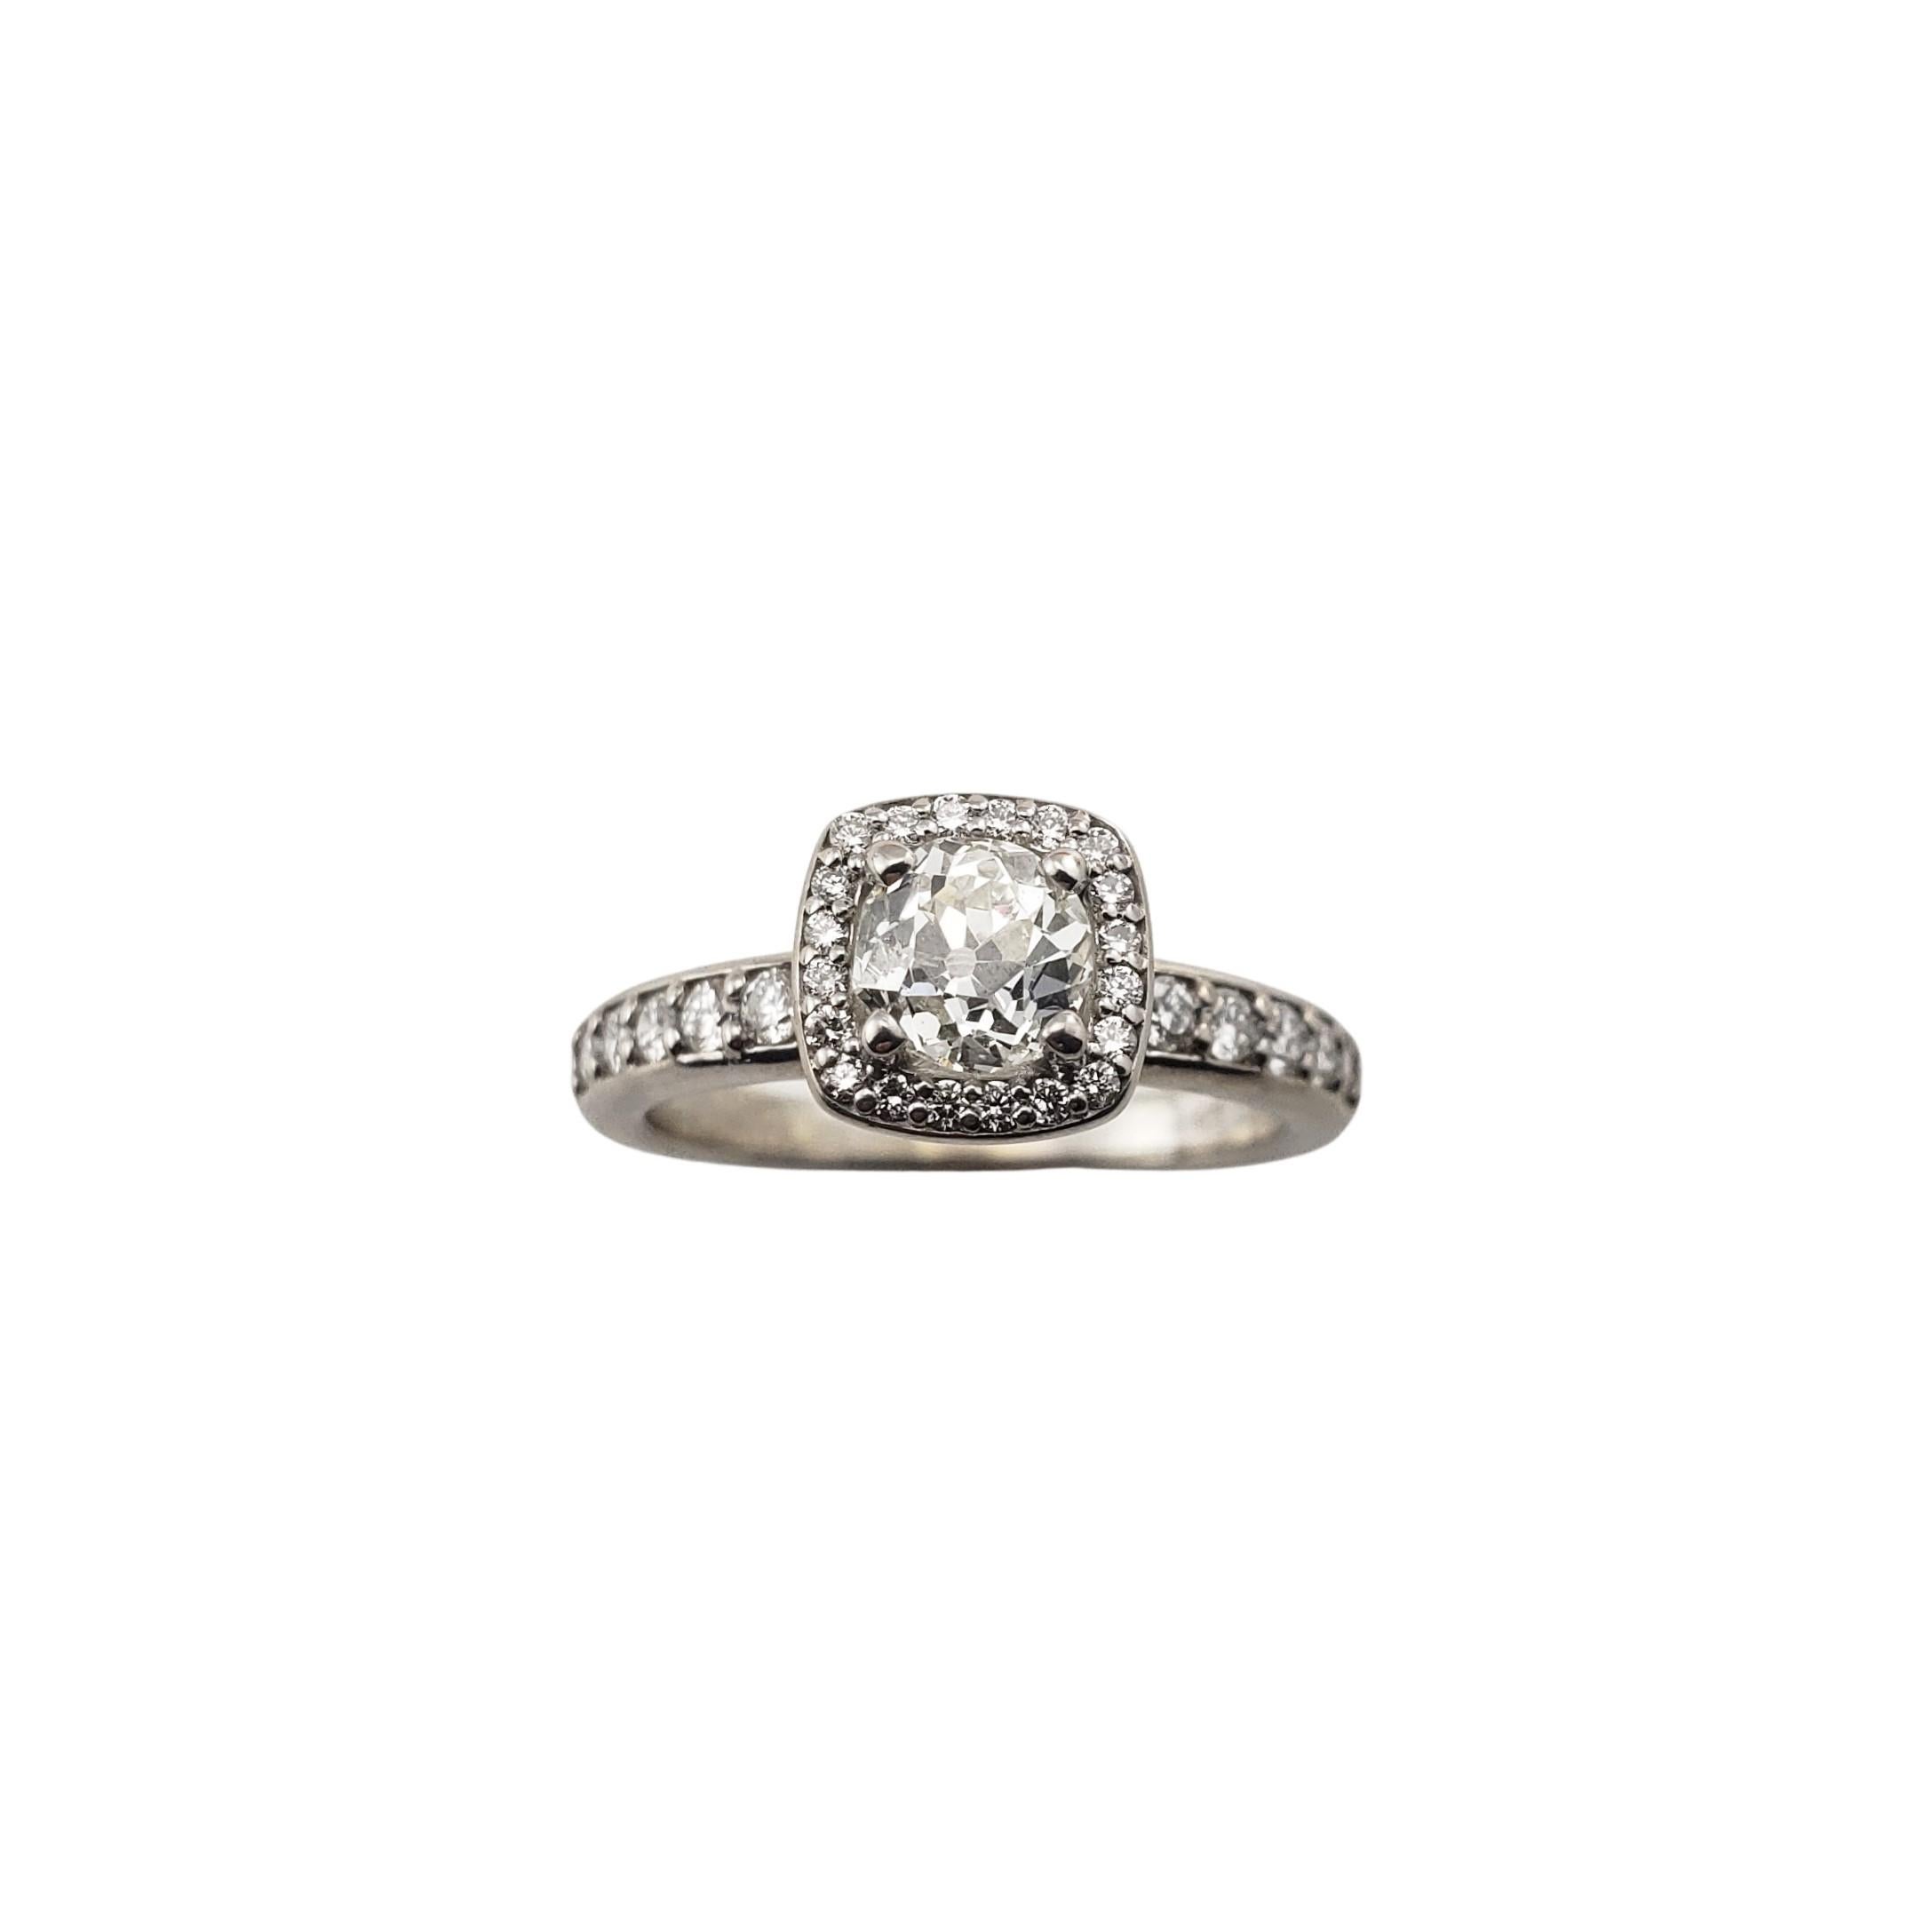 14 Karat White Gold Diamond Engagement Ring Size 5.5-

This sparkling ring features one center round old mine cut diamond (.45 ct.) surrounded by 32 round brilliant cut diamonds set in beautifully detailed 14K white gold.  Shank:  2 mm.

Approximate